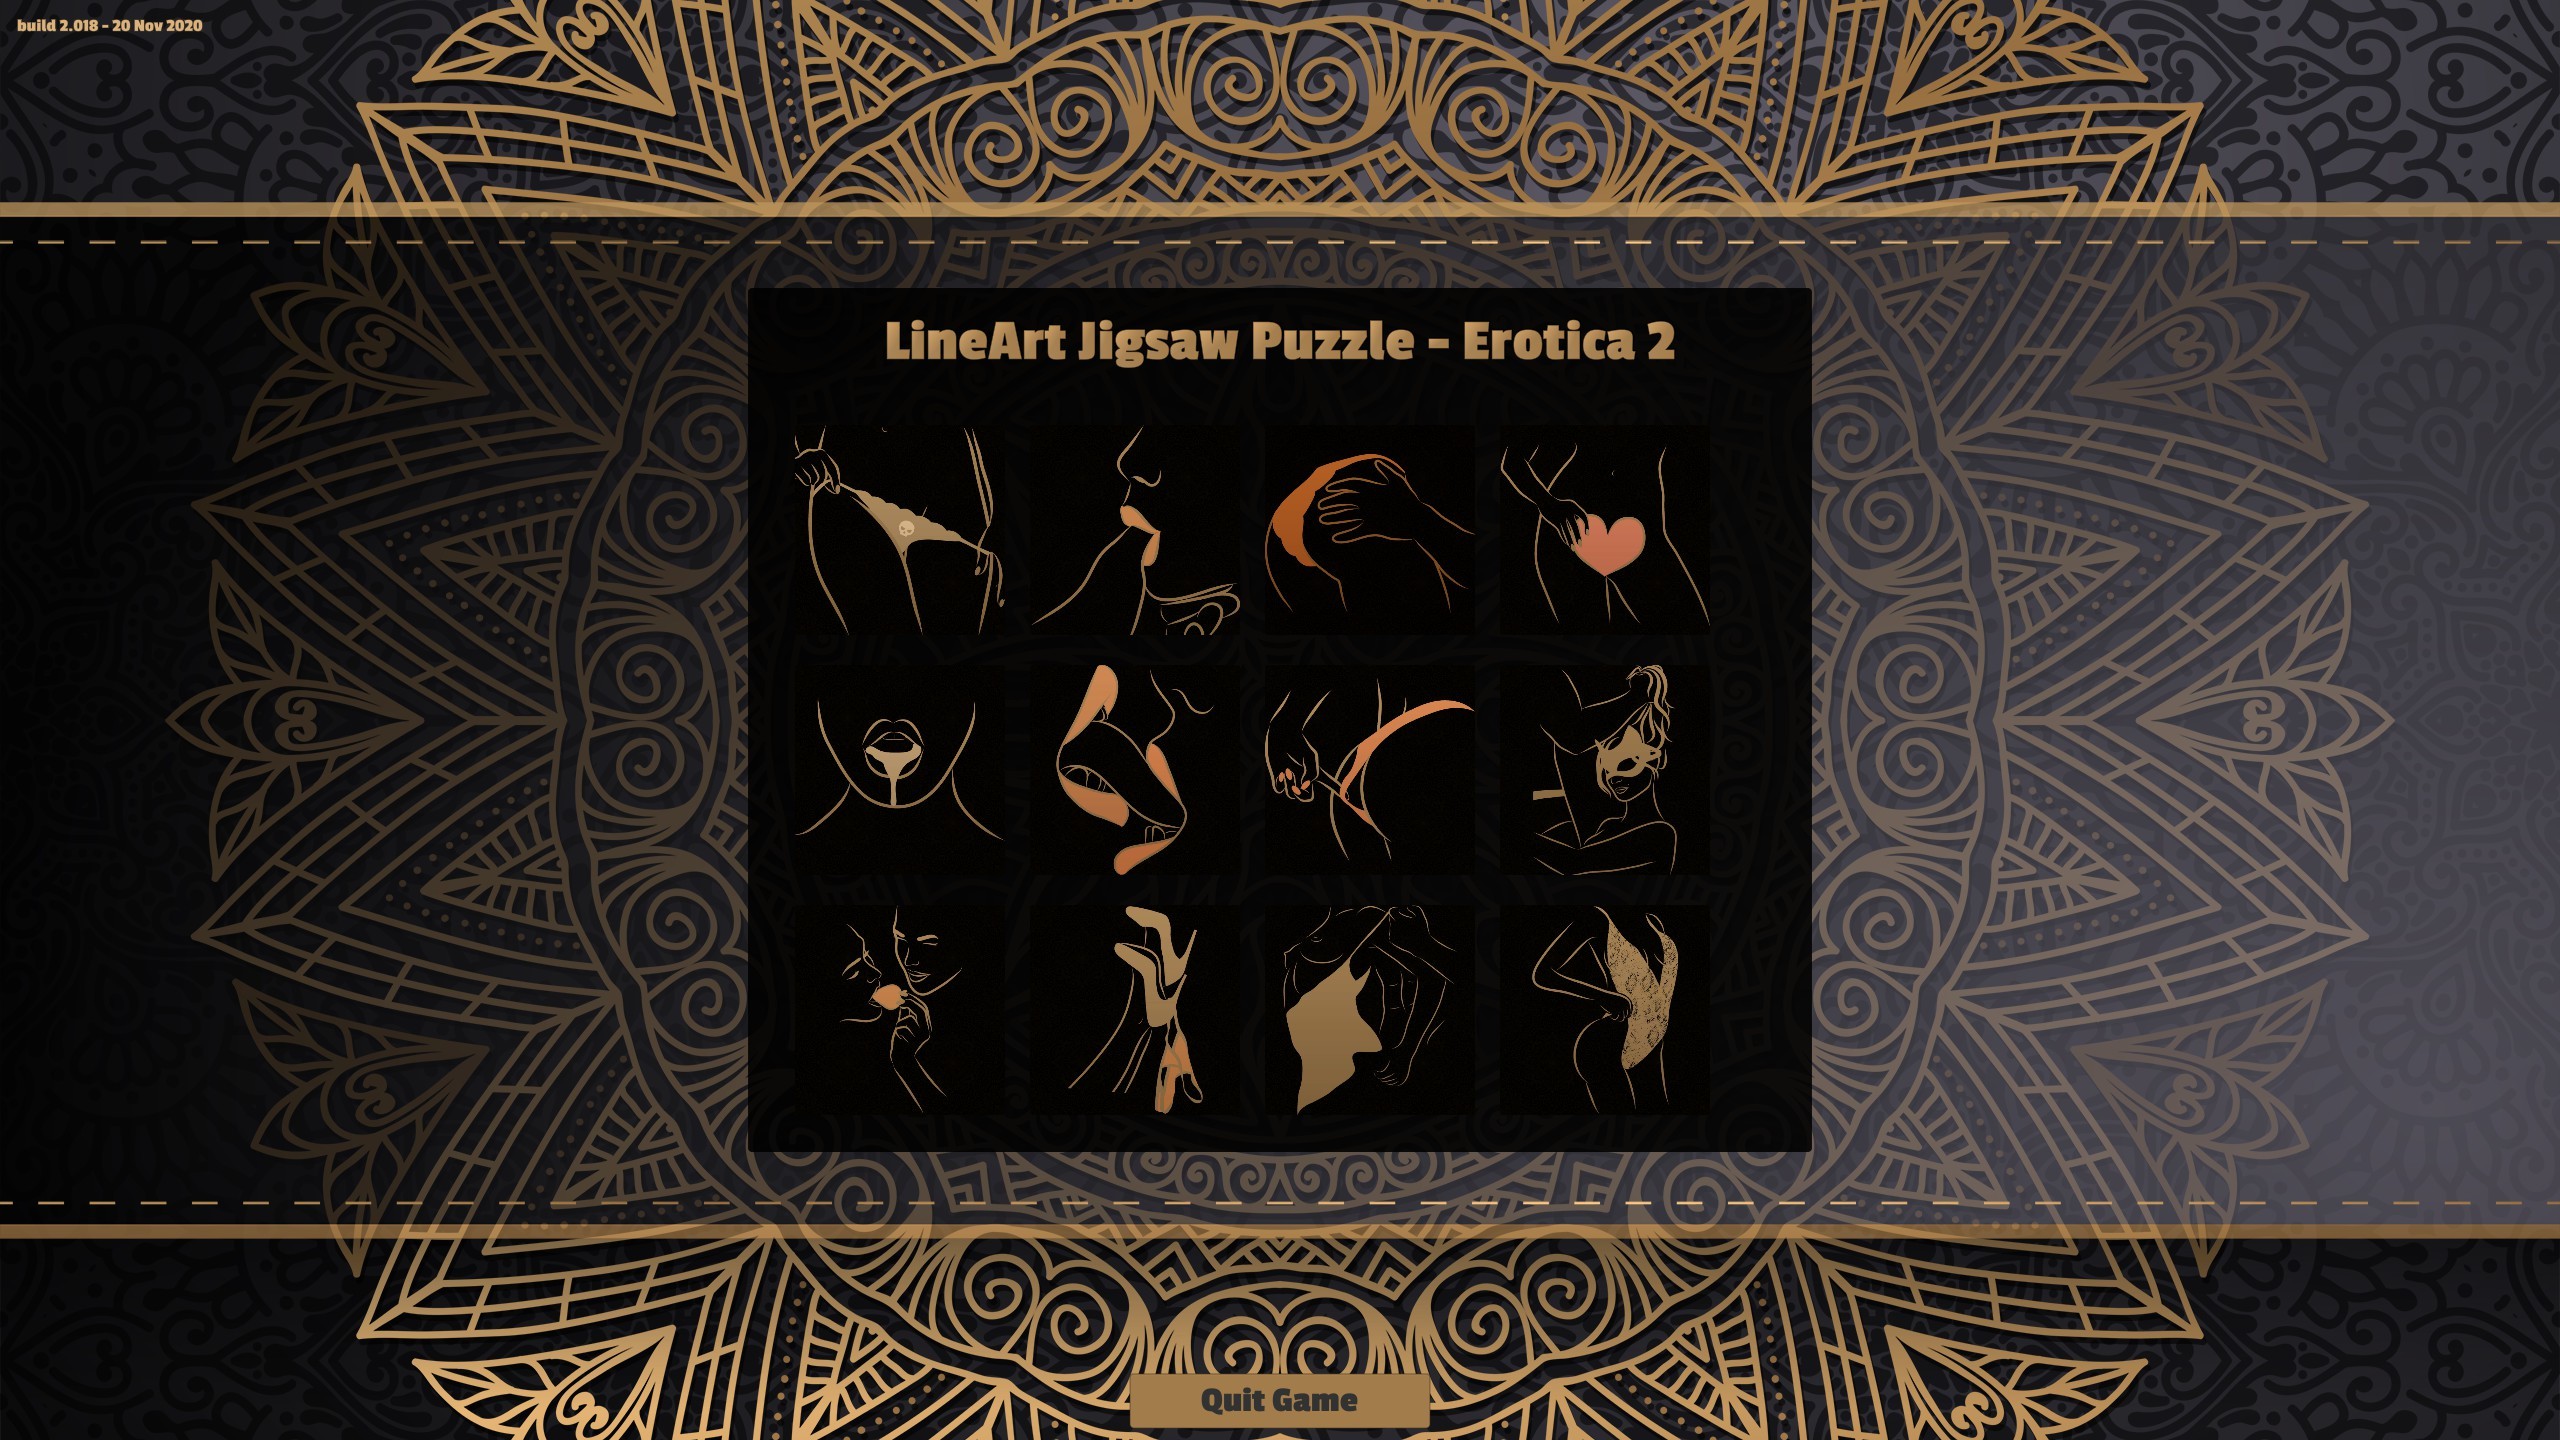 LineArt Jigsaw Puzzle - Erotica 2 Steam CD Key $0.21